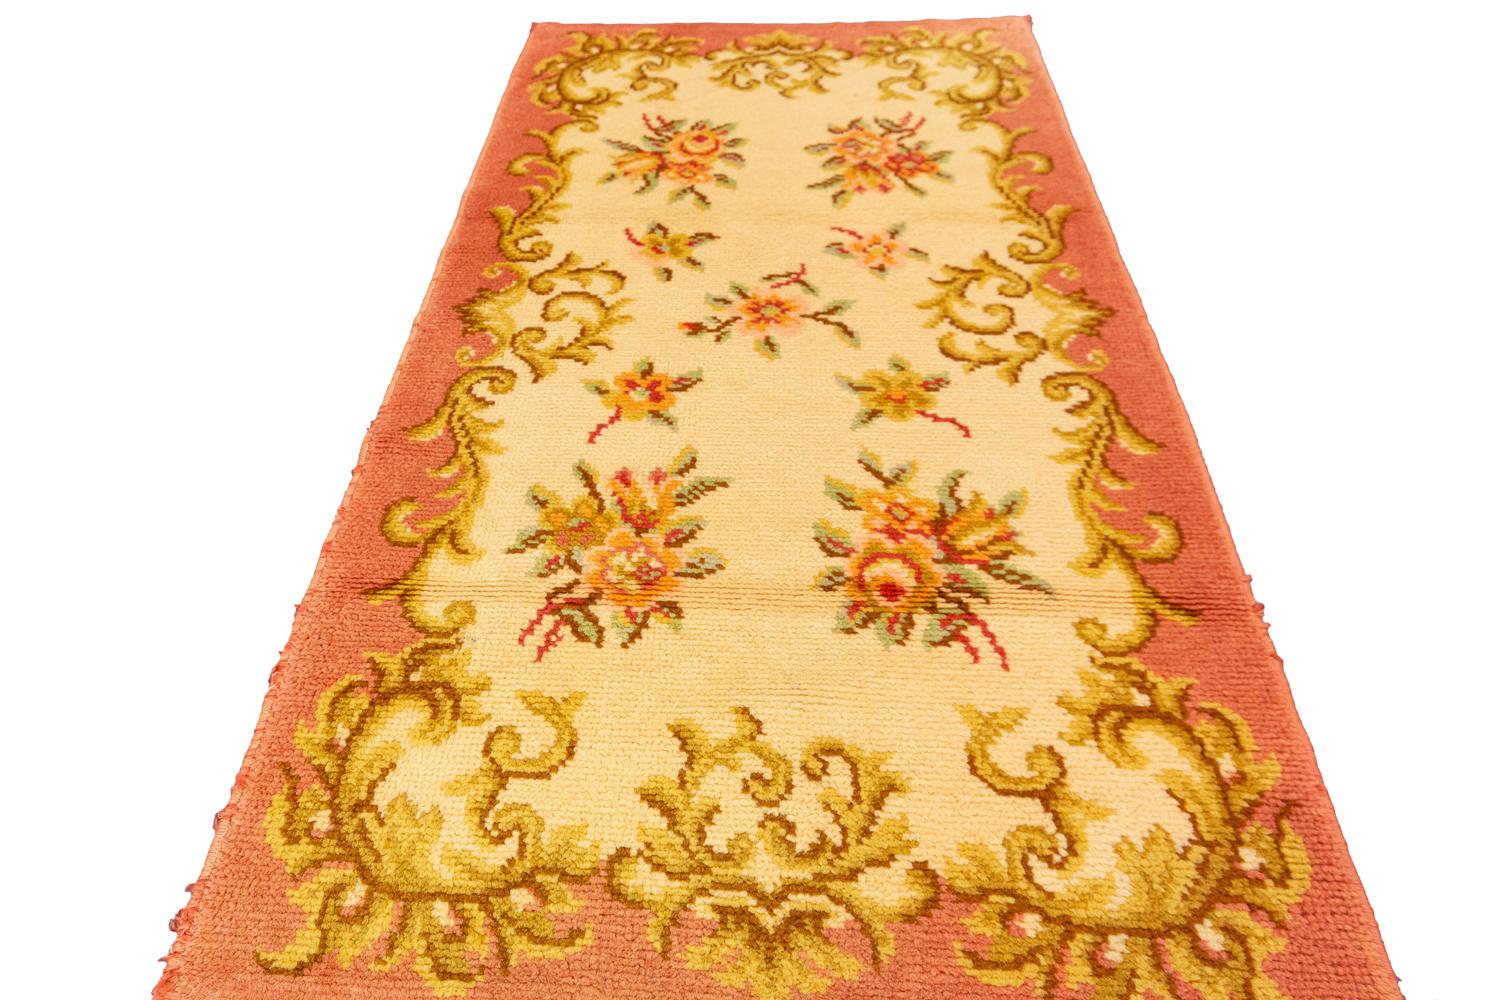 This is a vintage European rug woven during the second quarter of the 20th century circa 1920- 1950 and measures 141 x 72CM in size. It has a highly classical European drawing with golden-colored curling leaves which create a border and in close a